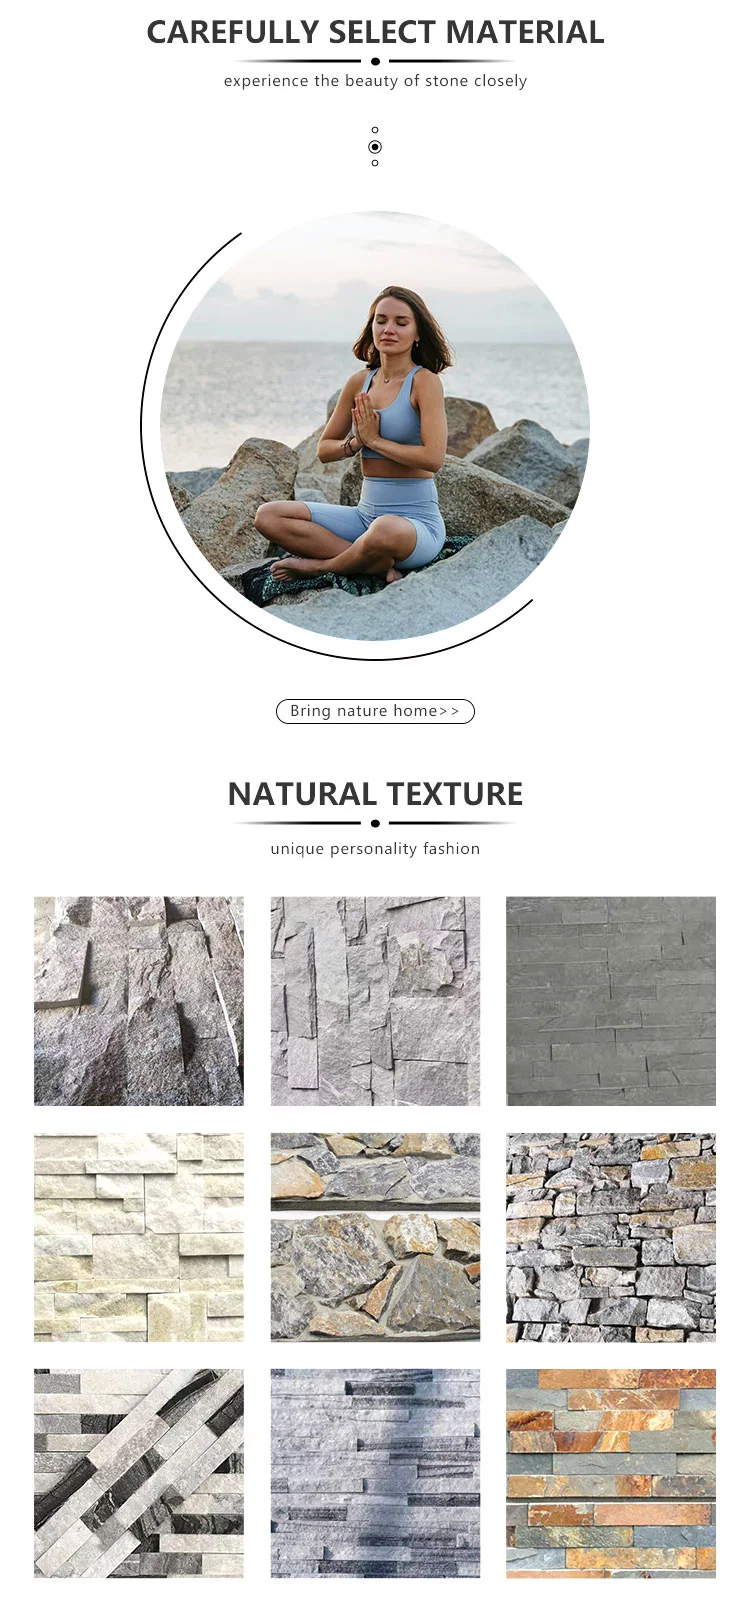 Blve Natural Marble Stone Wall Tiles Garden Decoration Culture Stone Wall Panel for Sale